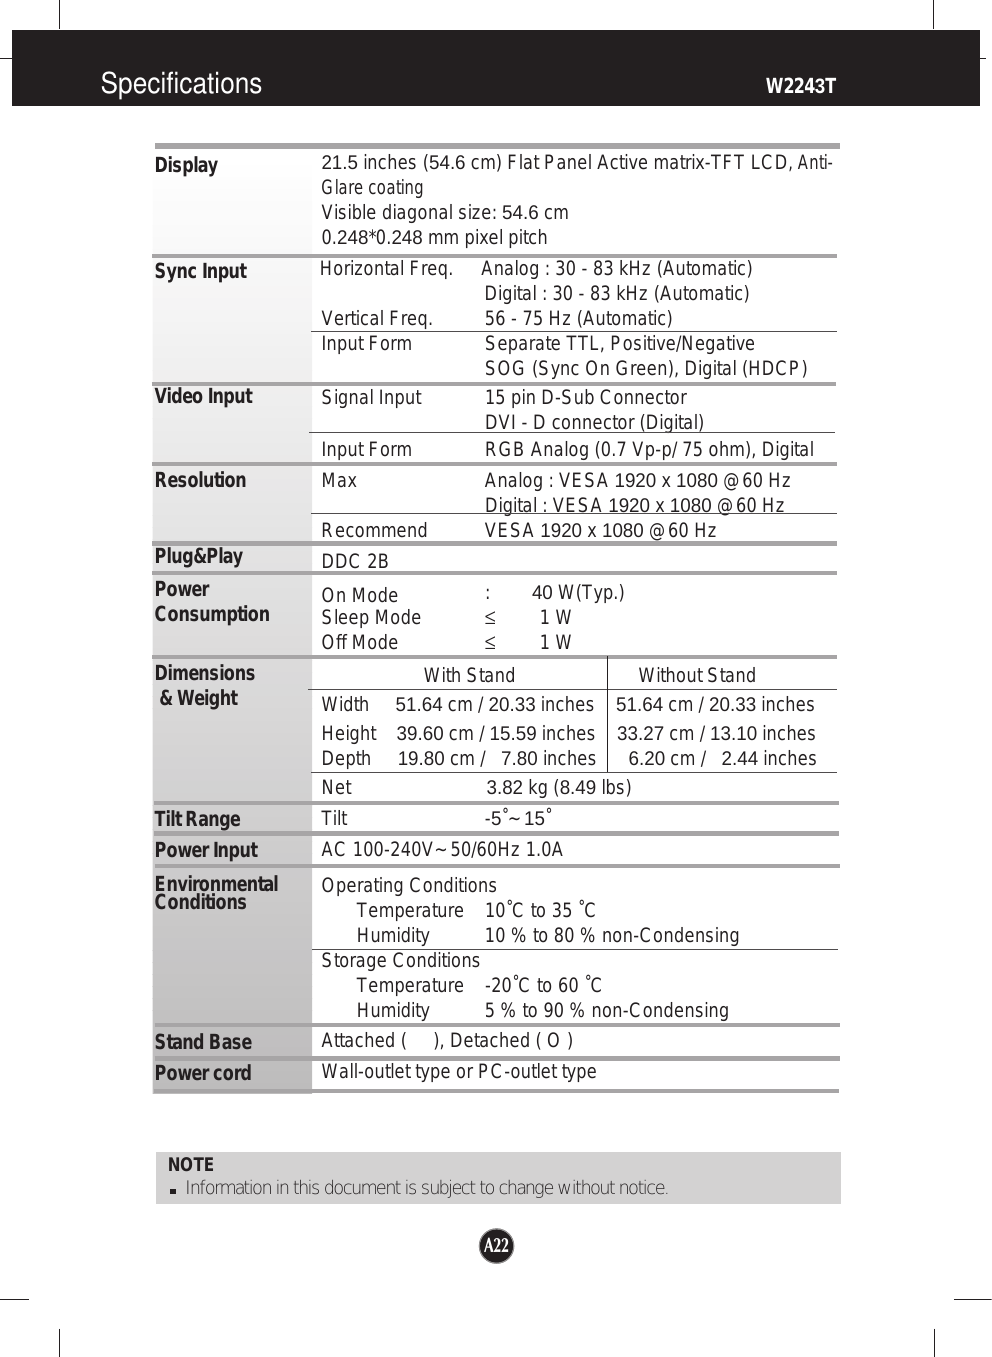 Specifications                                                                     W2243TNOTEInformation in this document is subject to change without notice.DisplaySync InputVideo InputResolutionPlug&amp;PlayPowerConsumptionDimensions&amp; WeightTilt RangePower InputEnvironmentalConditionsStand Base Power cord 21.5 inches (54.6 cm) Flat Panel Active matrix-TFT LCD, Anti-Glare coatingVisible diagonal size: 54.6 cm0.248*0.248 mm pixel pitchHorizontal Freq. Analog : 30 - 83 kHz (Automatic)Digital : 30 - 83 kHz (Automatic)Vertical Freq. 56 - 75 Hz (Automatic)Input Form Separate TTL, Positive/NegativeSOG (Sync On Green), Digital (HDCP)Signal Input 15 pin D-Sub ConnectorDVI - D connector (Digital)Input Form RGB Analog (0.7 Vp-p/ 75 ohm), DigitalMax Analog : VESA 1920 x 1080 @60 HzDigital : VESA 1920 x 1080 @60 HzRecommend VESA 1920 x 1080 @60 HzDDC 2B   On Mode :        40 W(Typ.)Sleep Mode ≤1 WOff Mode ≤1 WWith Stand Without StandWidth     51.64 cm / 20.33 inches    51.64 cm / 20.33 inchesHeight    39.60 cm / 15.59 inches    33.27 cm / 13.10 inches Depth     19.80 cm /   7.80 inches      6.20 cm /   2.44 inchesNet                          3.82 kg (8.49 lbs)Tilt -5˚~ 15˚AC 100-240V~ 50/60Hz 1.0A Operating ConditionsTemperature 10˚C to 35 ˚CHumidity 10 % to 80 % non-CondensingStorage ConditionsTemperature -20˚C to 60 ˚C Humidity 5 % to 90 % non-CondensingAttached (     ), Detached ( O )Wall-outlet type or PC-outlet typeA22A22